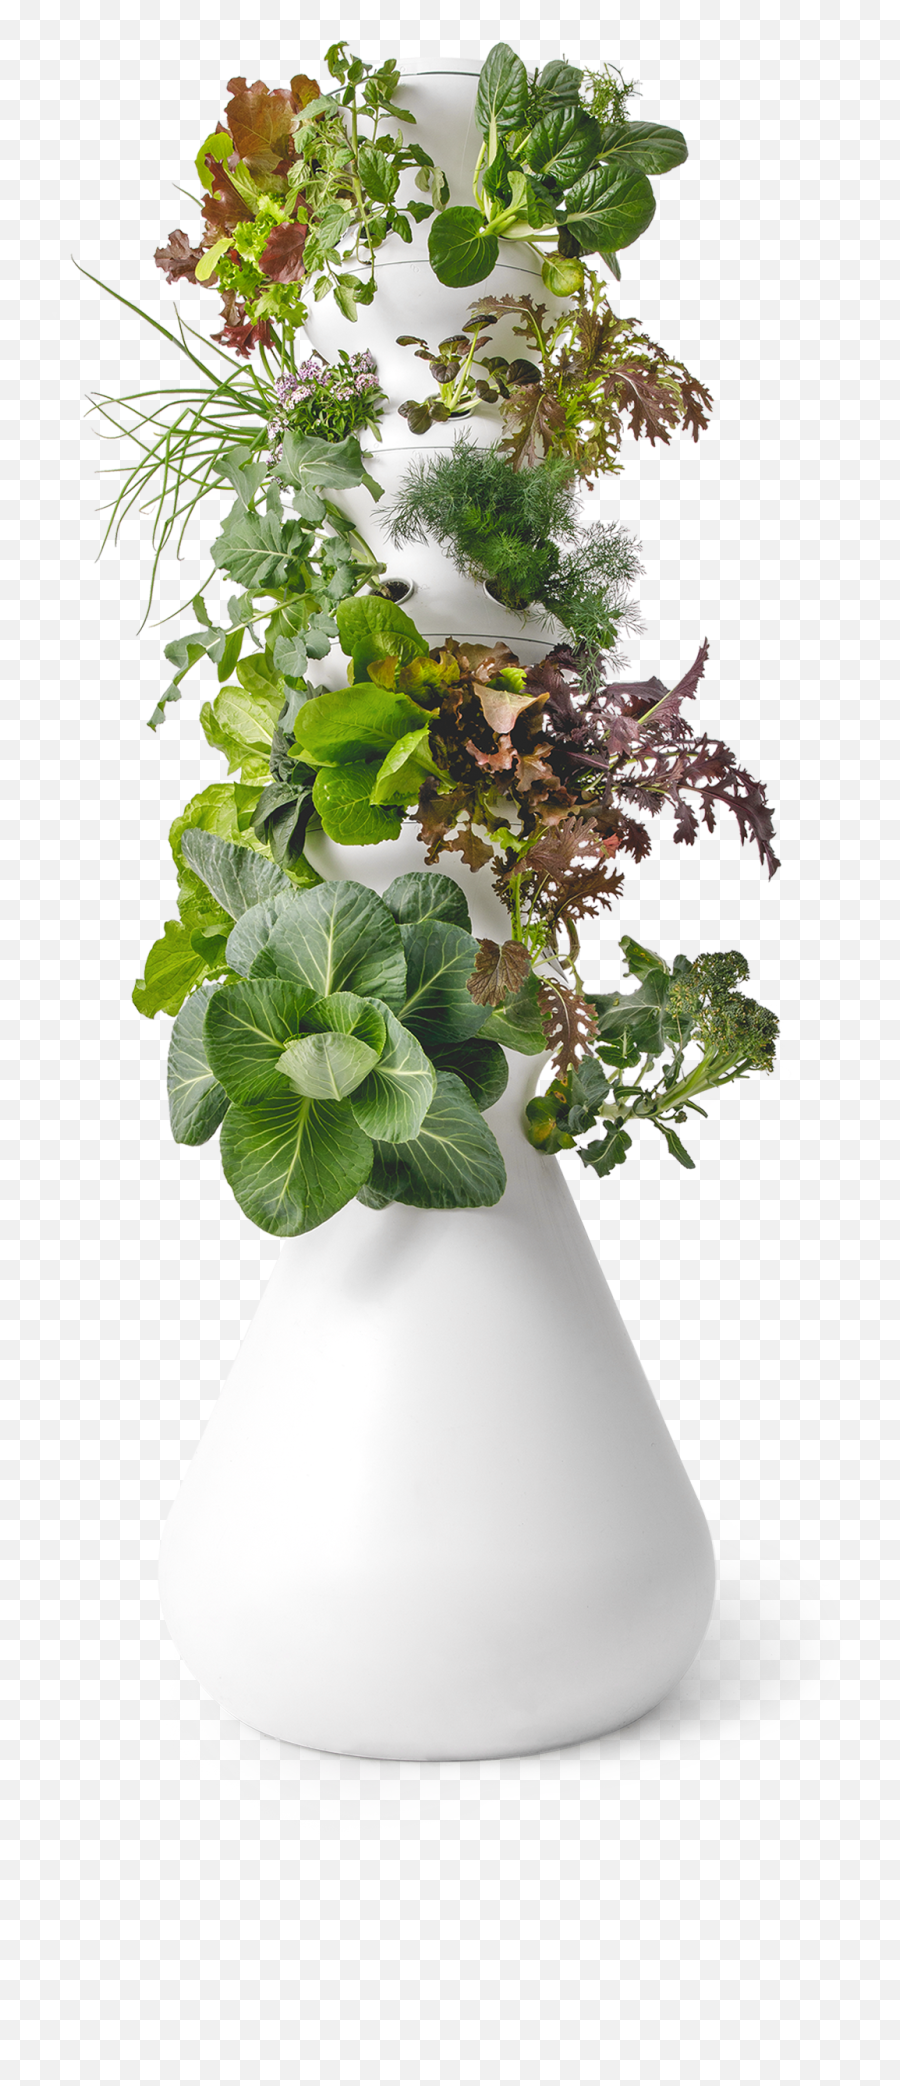 The Future Of Food Is Grow - Ityourself Lettuce Grow Farmstand Png,Growing Plant Png